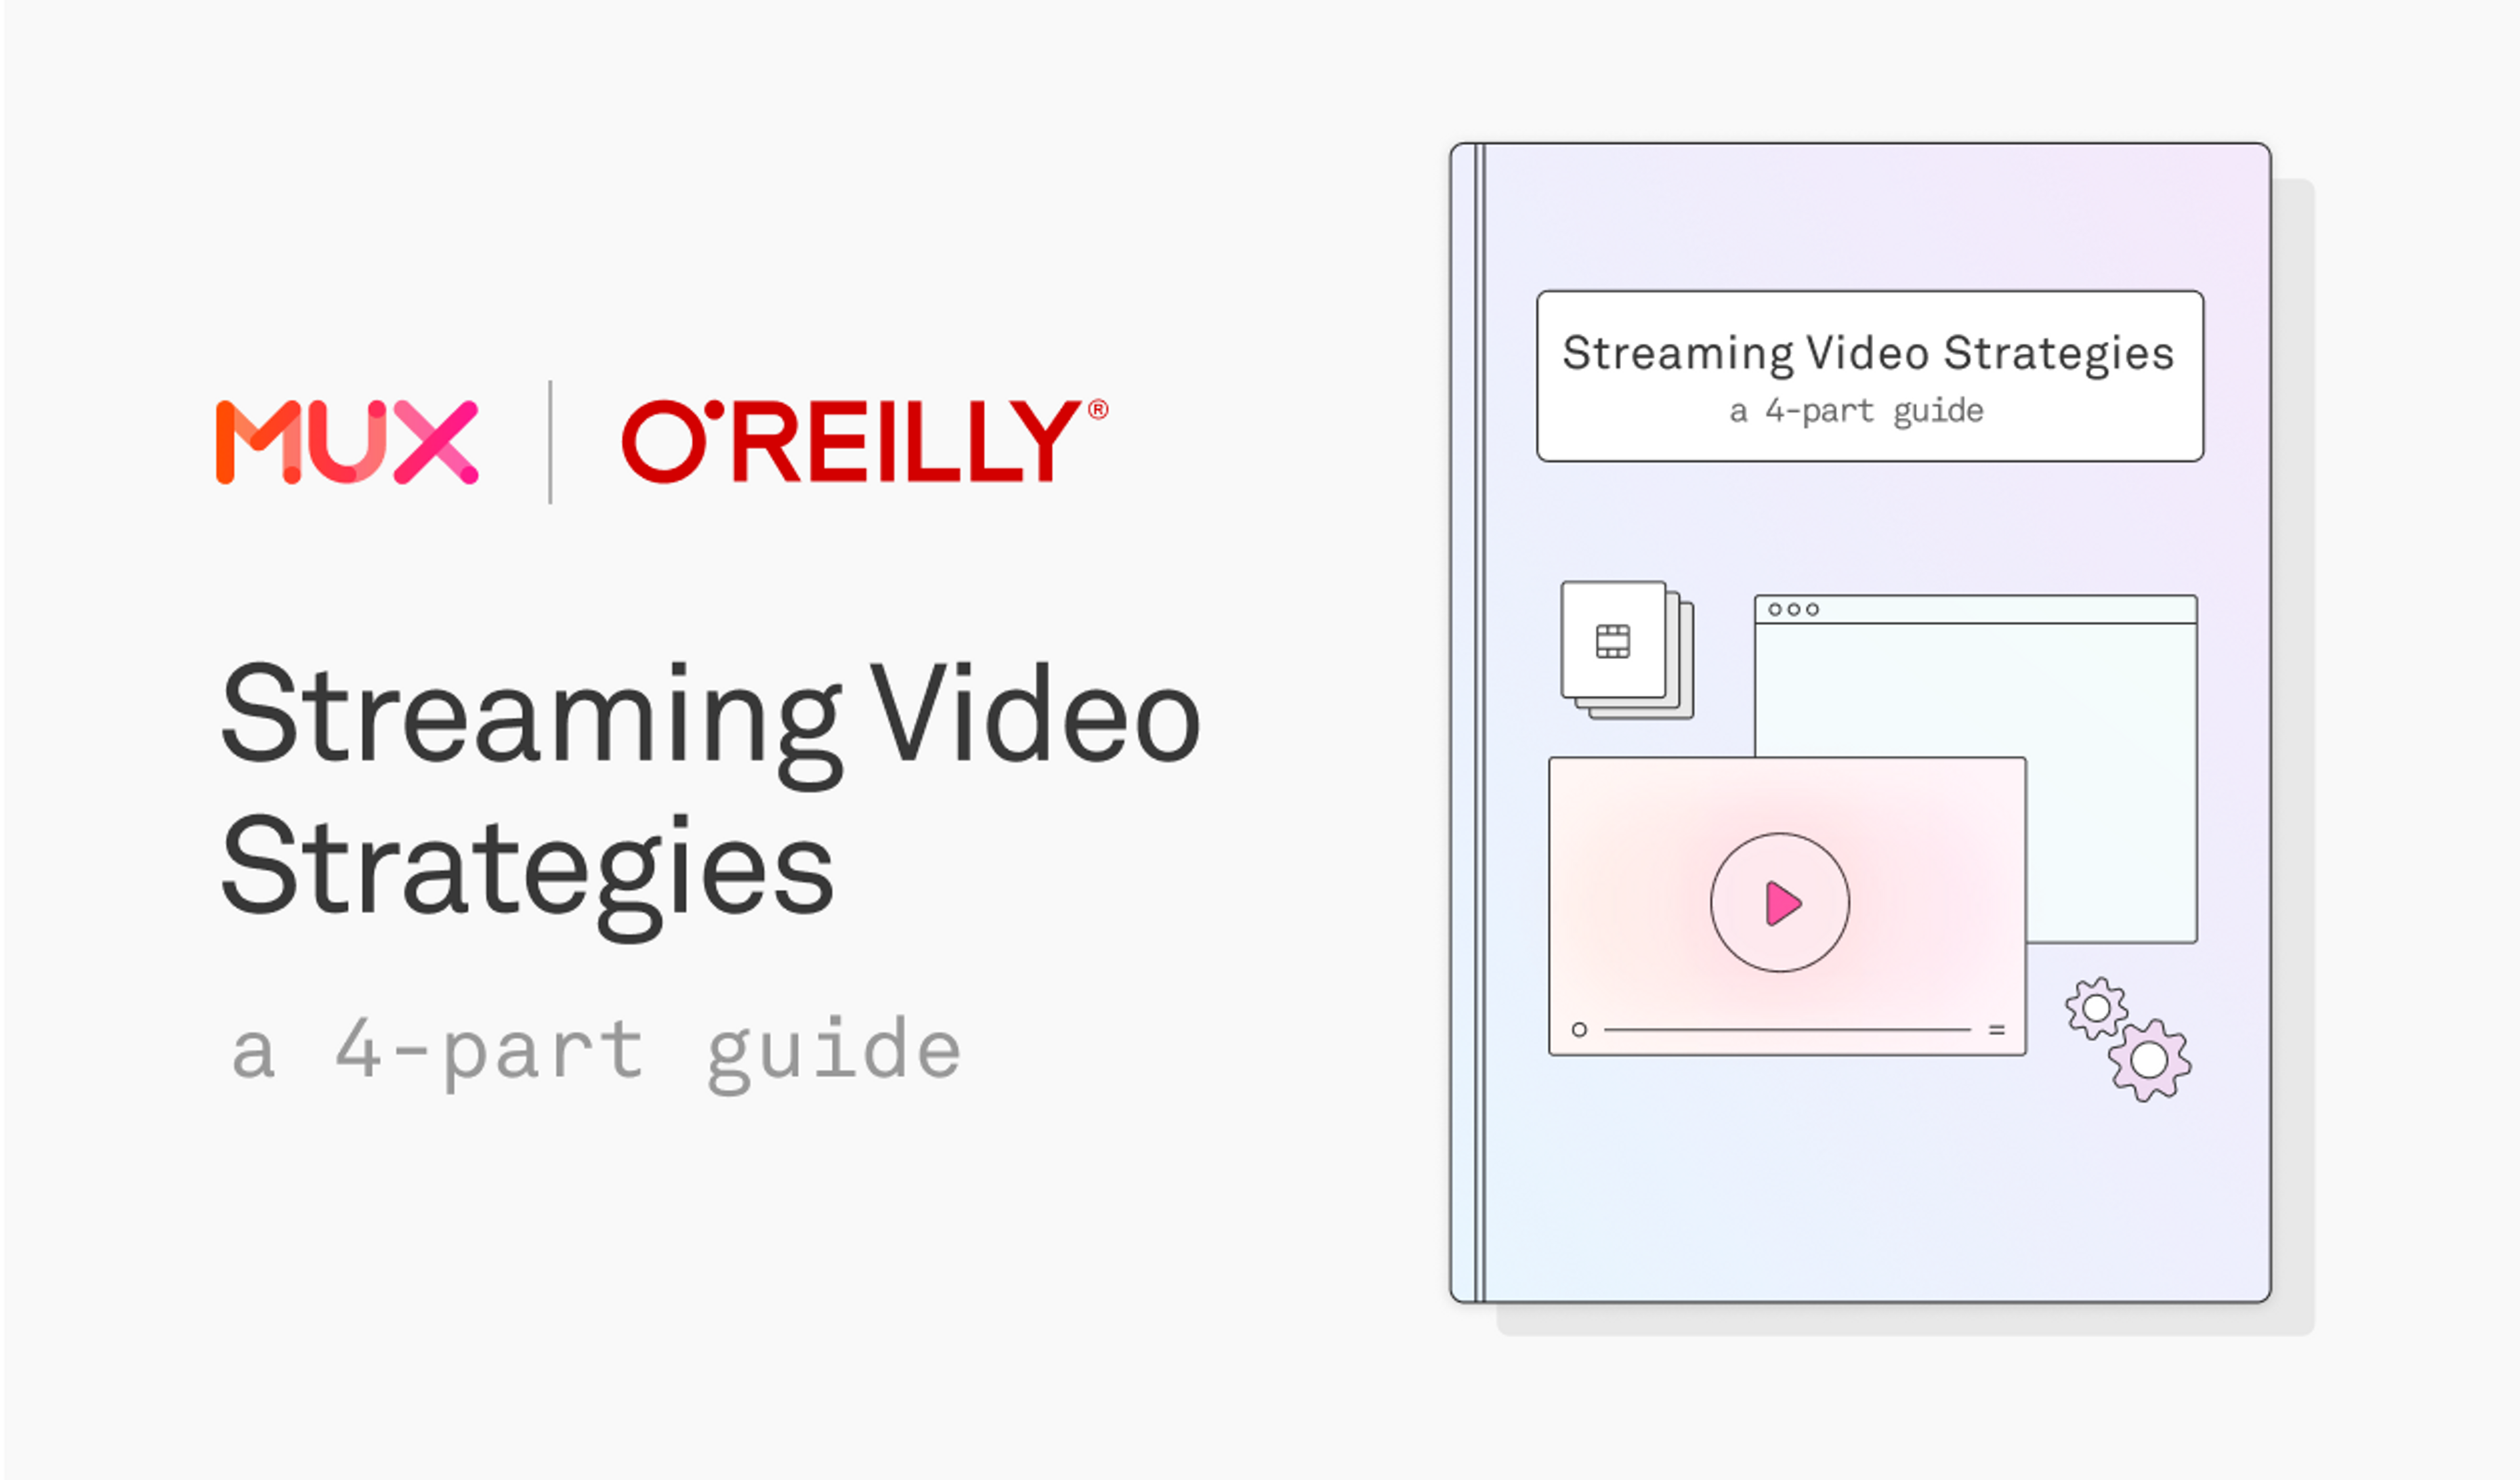 Mux and O'Reilly logo side-by-side above the words "Streaming Video Strategies a 4-part guide". Below is a pink box that reads Free download. The the right of the text is an image of a report with the same title.